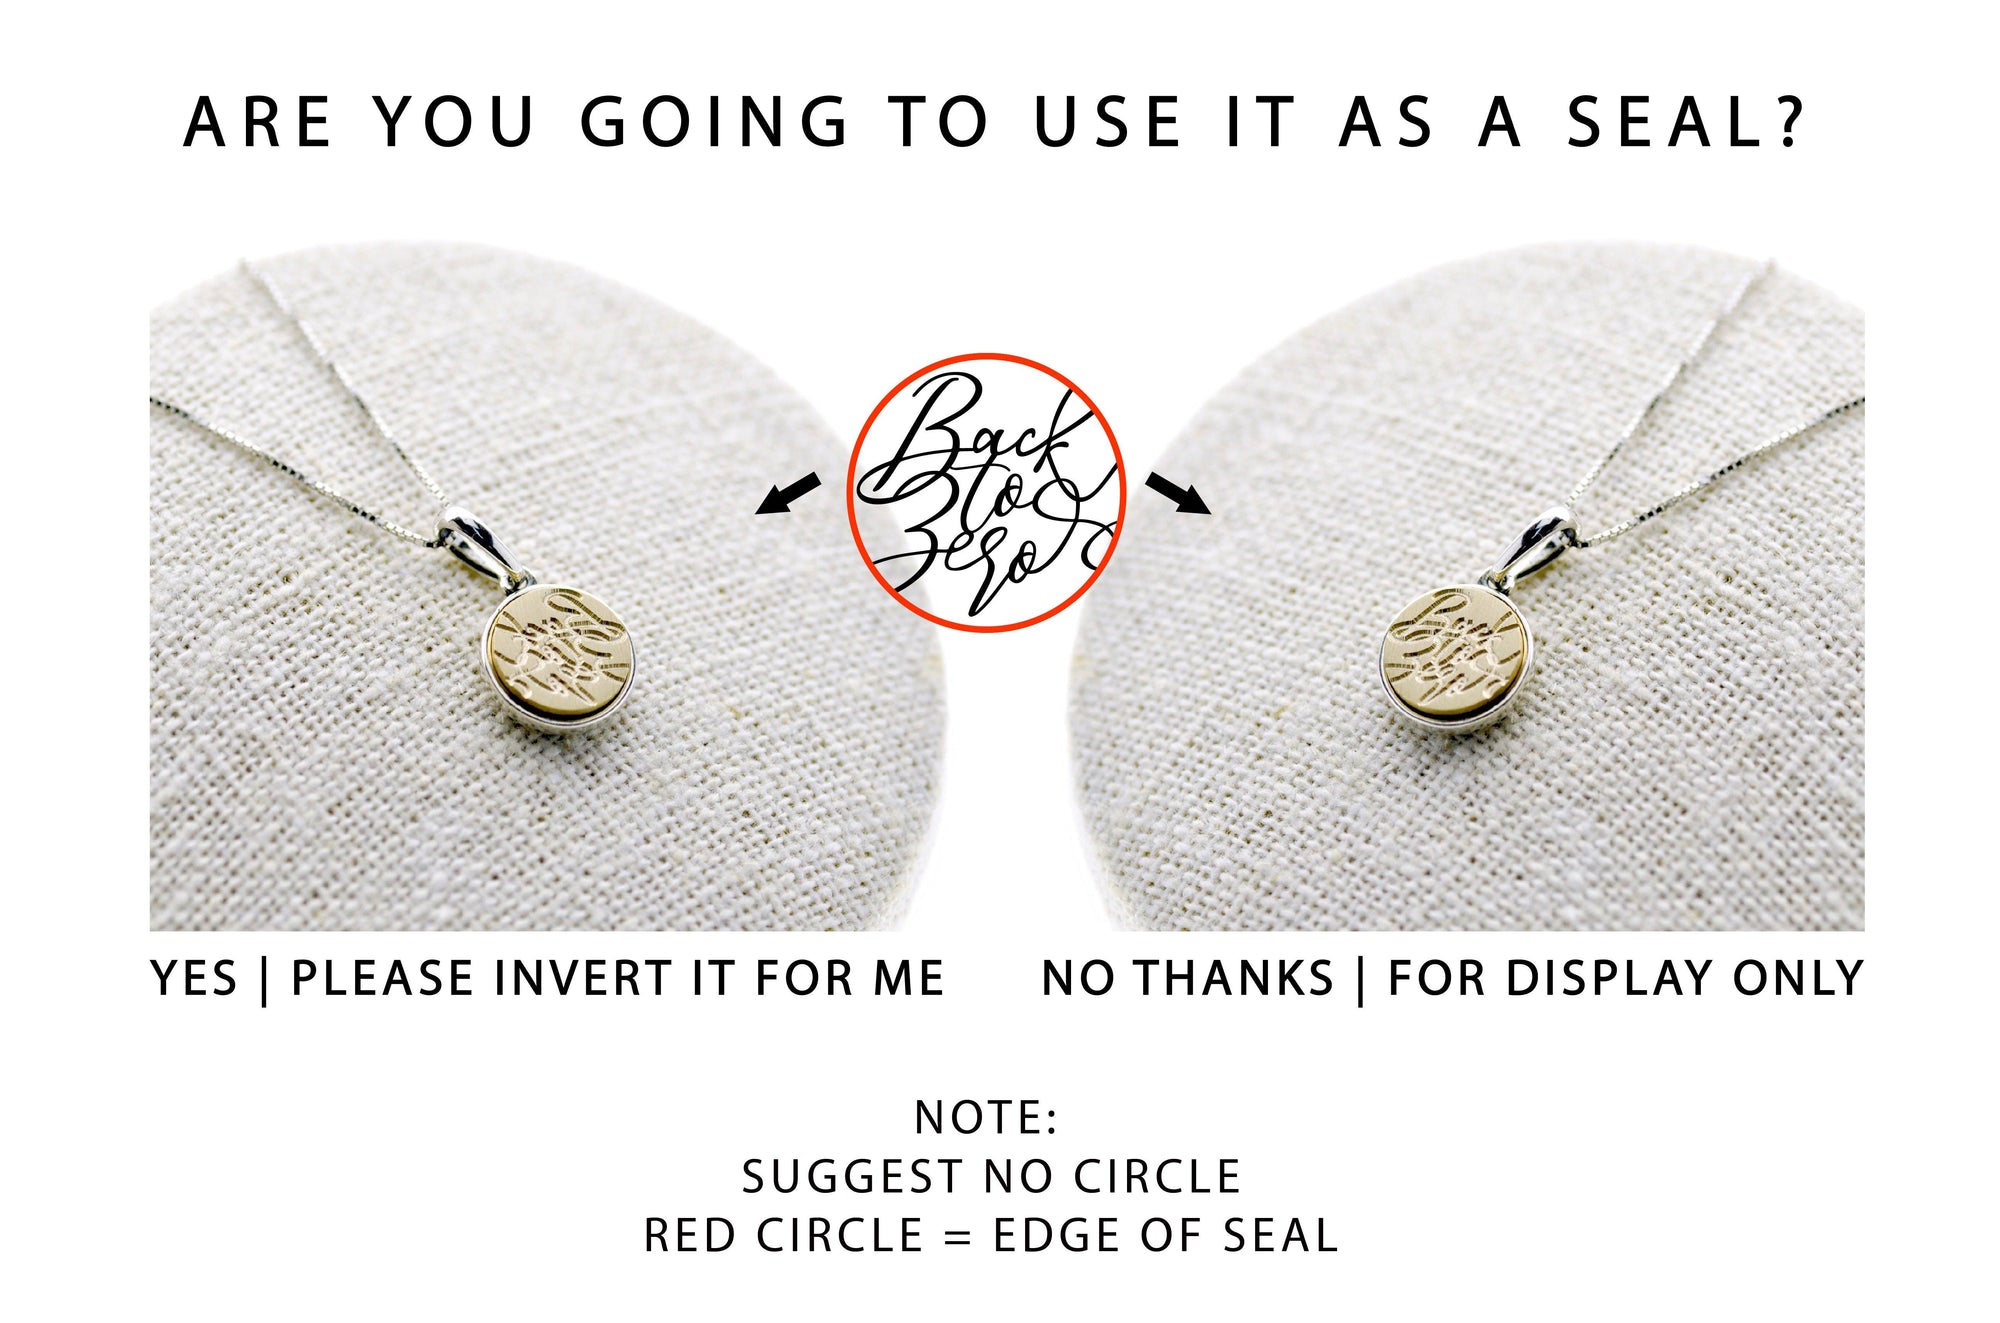 Design your own Filigree Charm Signet Necklace - Backtozero B20 - 10mm, 10mm necklace, accessory, bespoke, charm, Custom, customsignet, Design Your Own, Filigree, filigree charm, floating, her, jewelry, necklace, signet, signet necklace